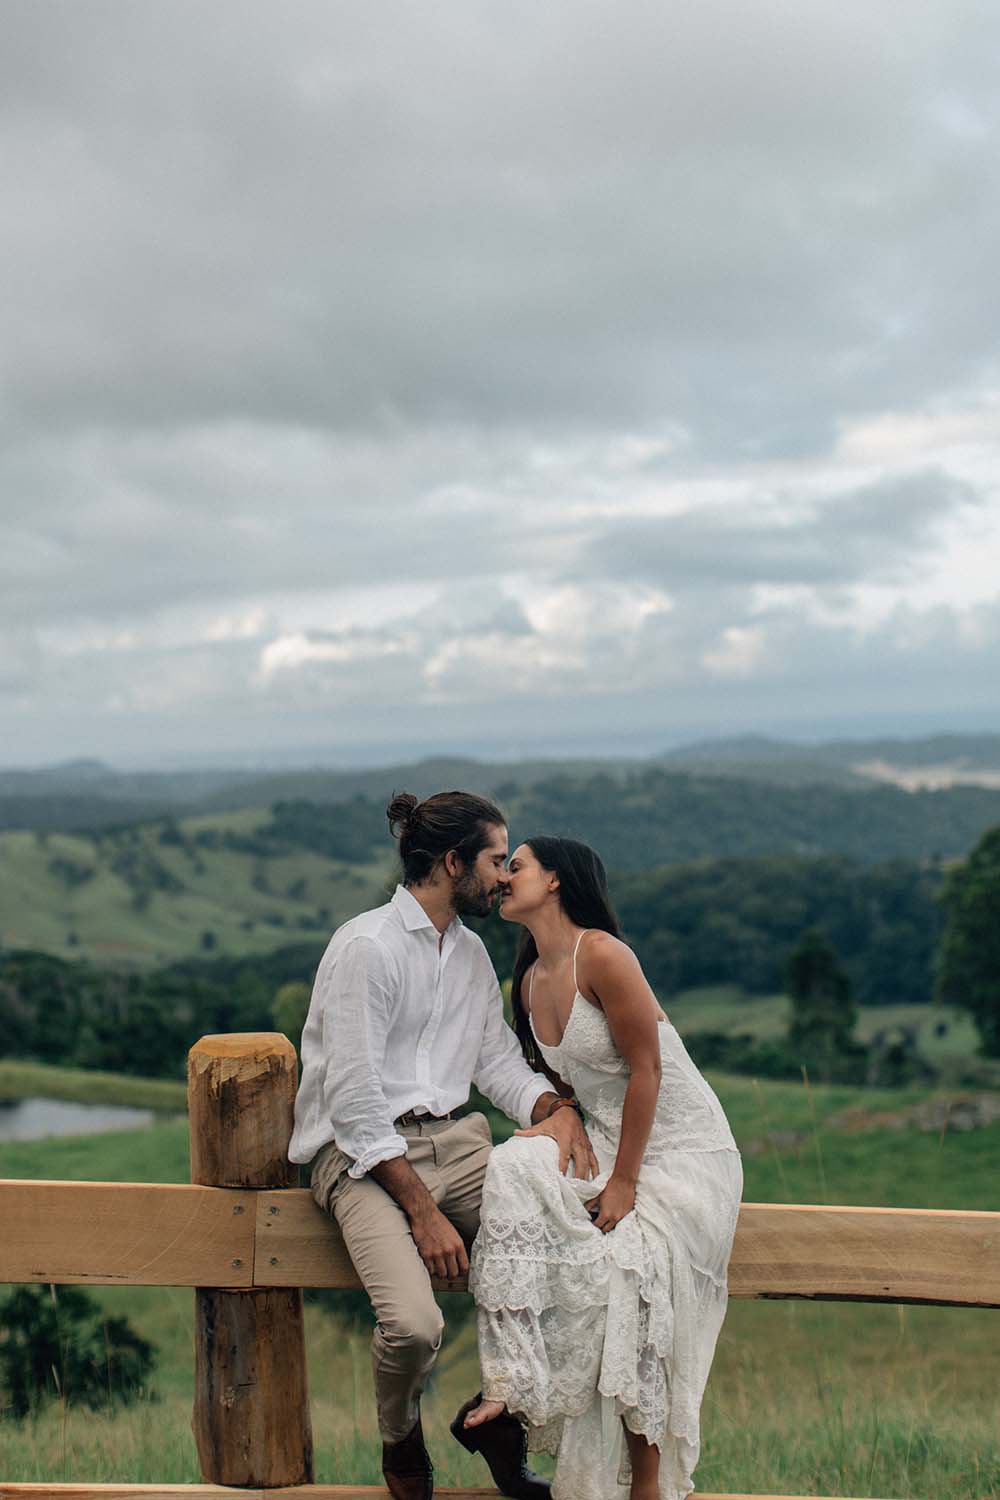 At Dusk Tweed Hinterland Styled Shoot Bramblewood Farm | The Events Lounge - Gold Coast Wedding Planner and Stylist - www.theeventslounge.com.au